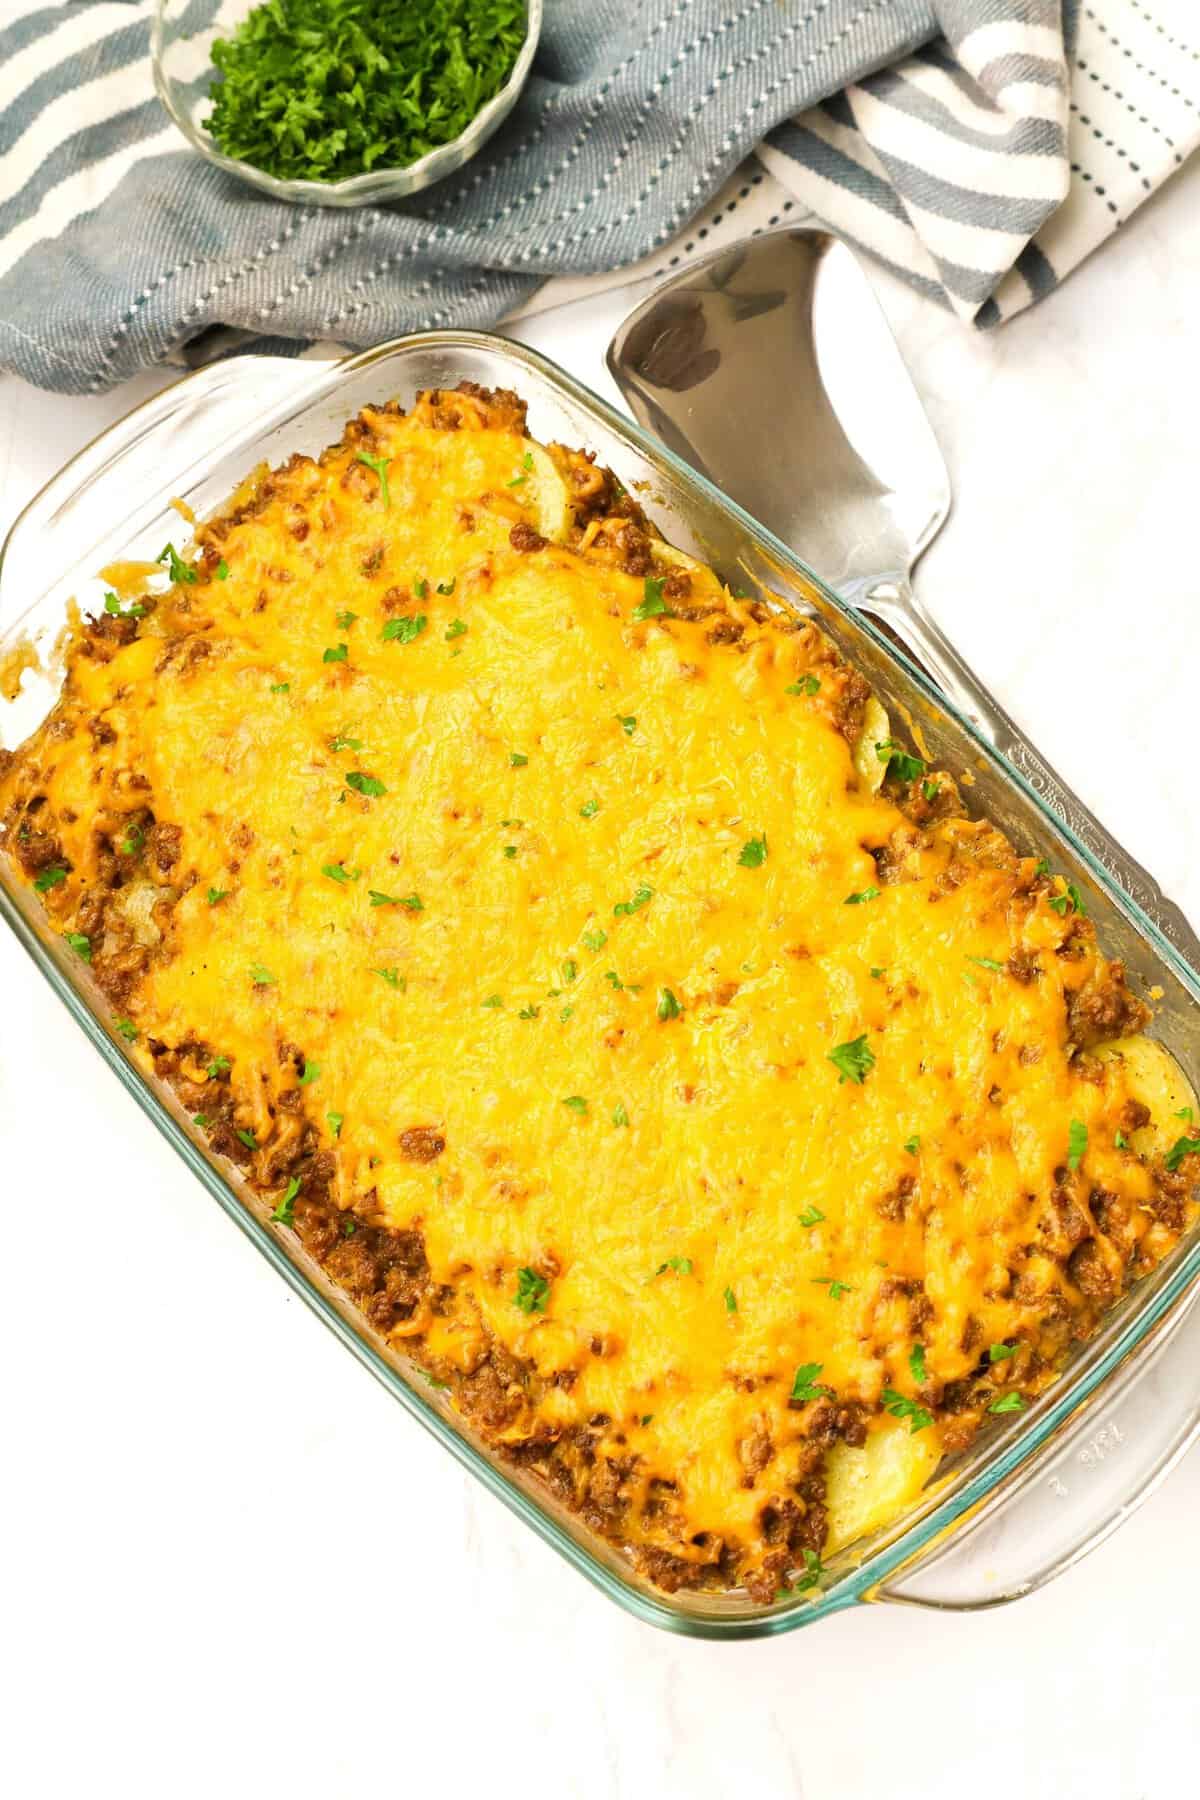 Insanely delicious Ground Beef and Potato Casserole fresh from the oven and ready to enjoy